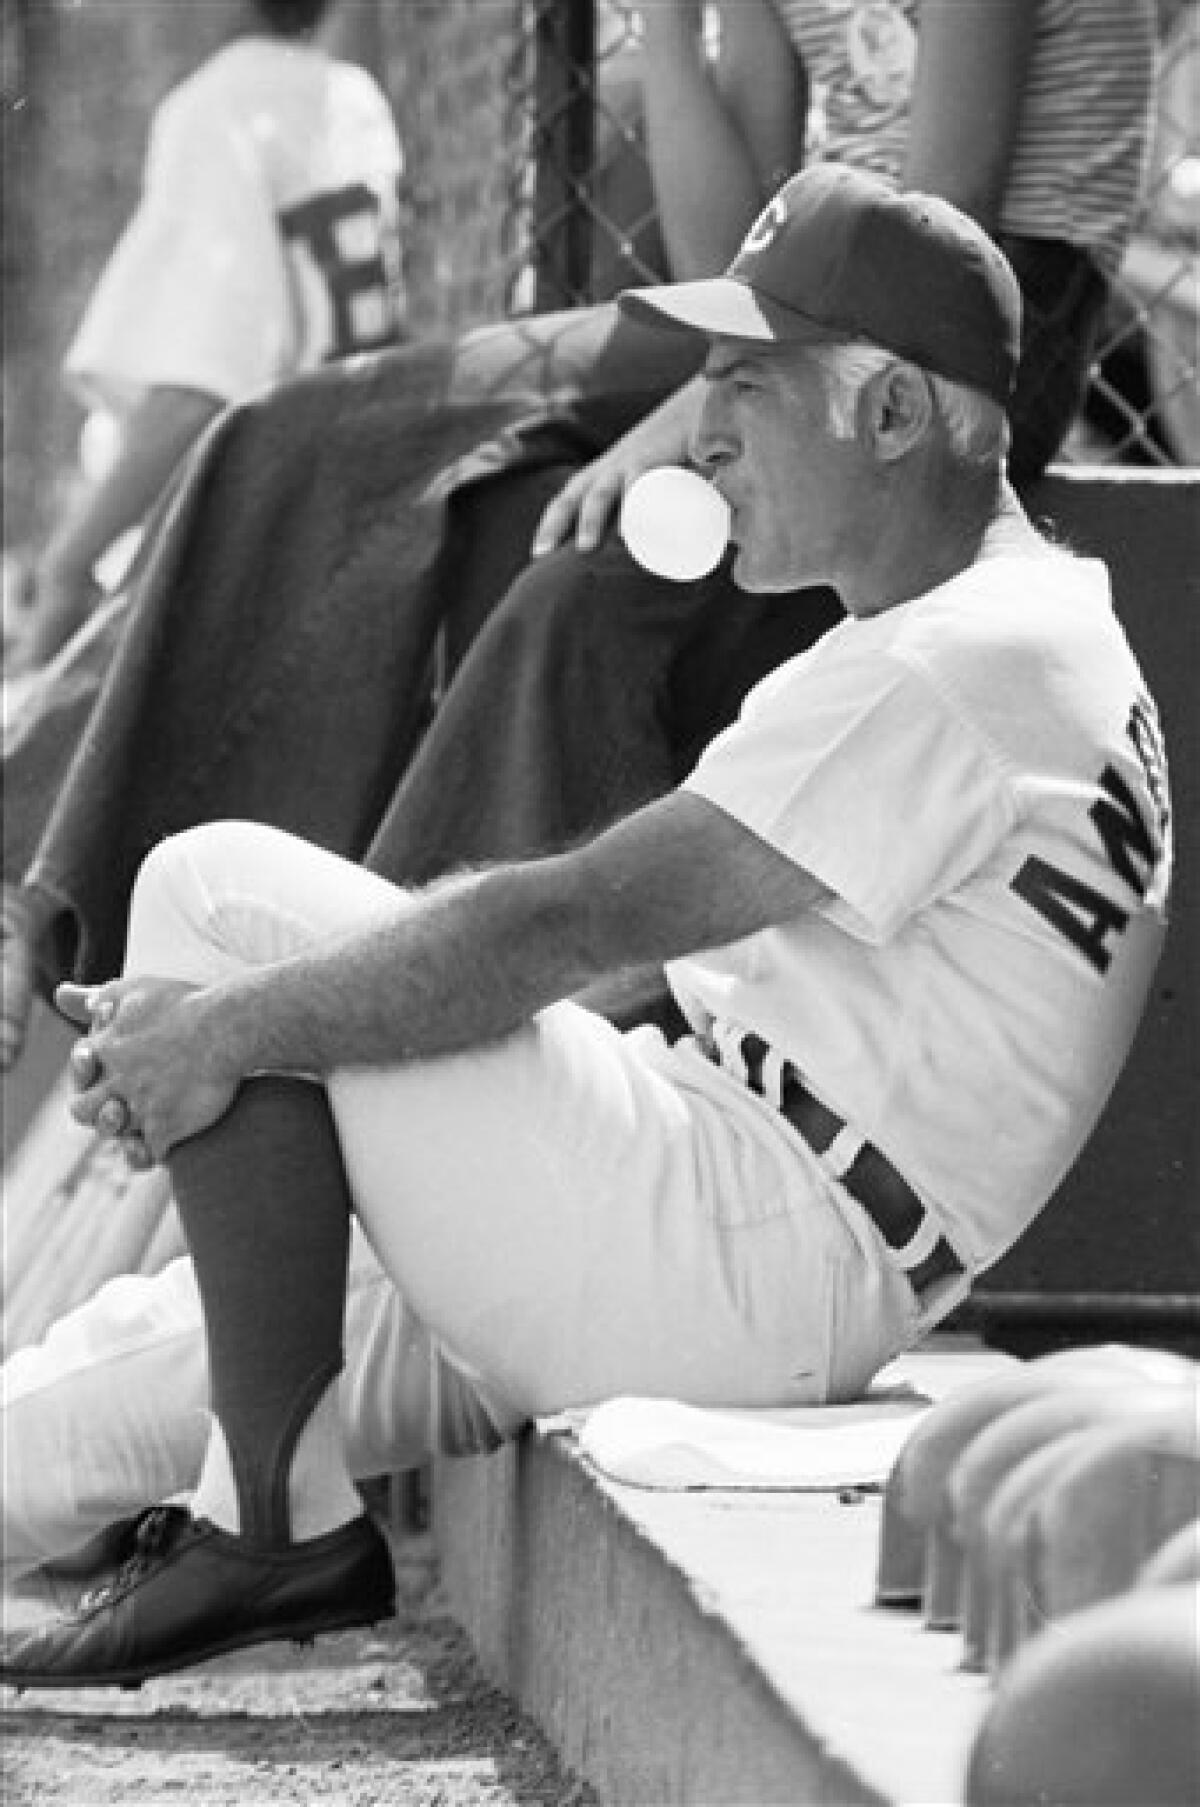 Hall of Fame manager Sparky Anderson dead at 76